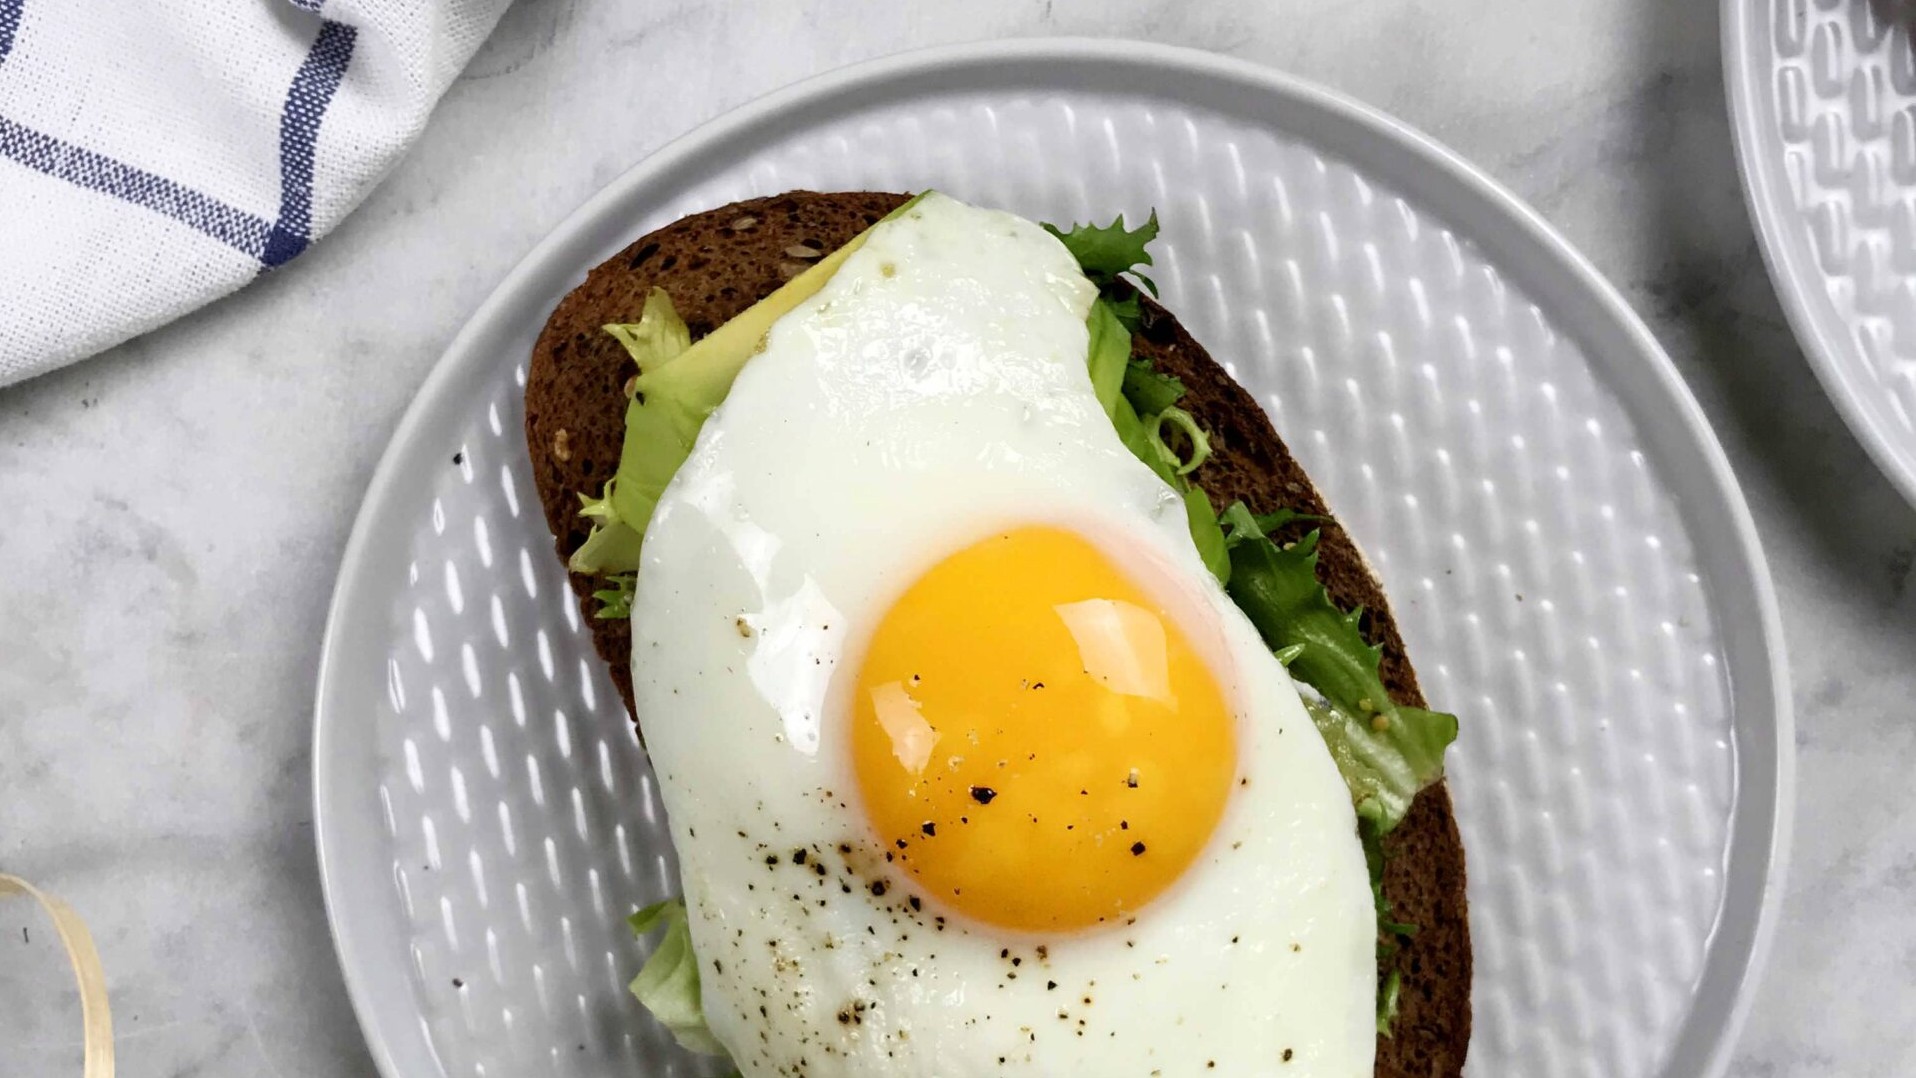 TOASTED BREAD WITH CURLY LETTUCE, AVOCADO AND EGG